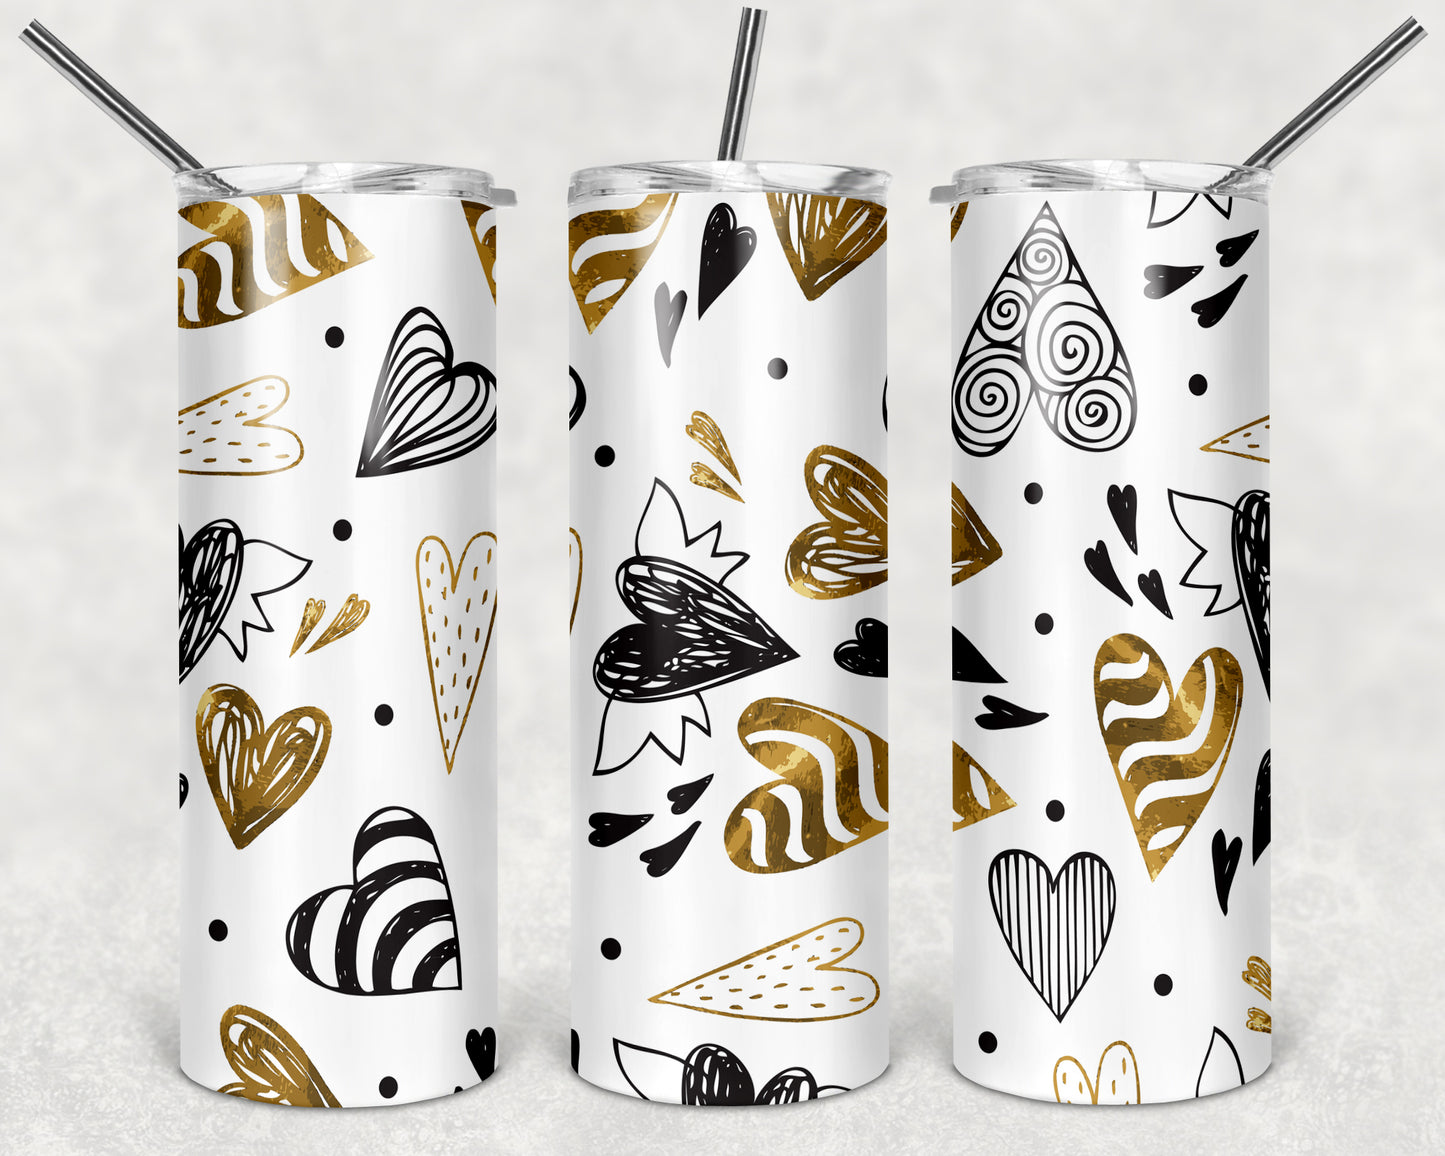 20 oz double wall insulated tumbler. Multiple designs available.